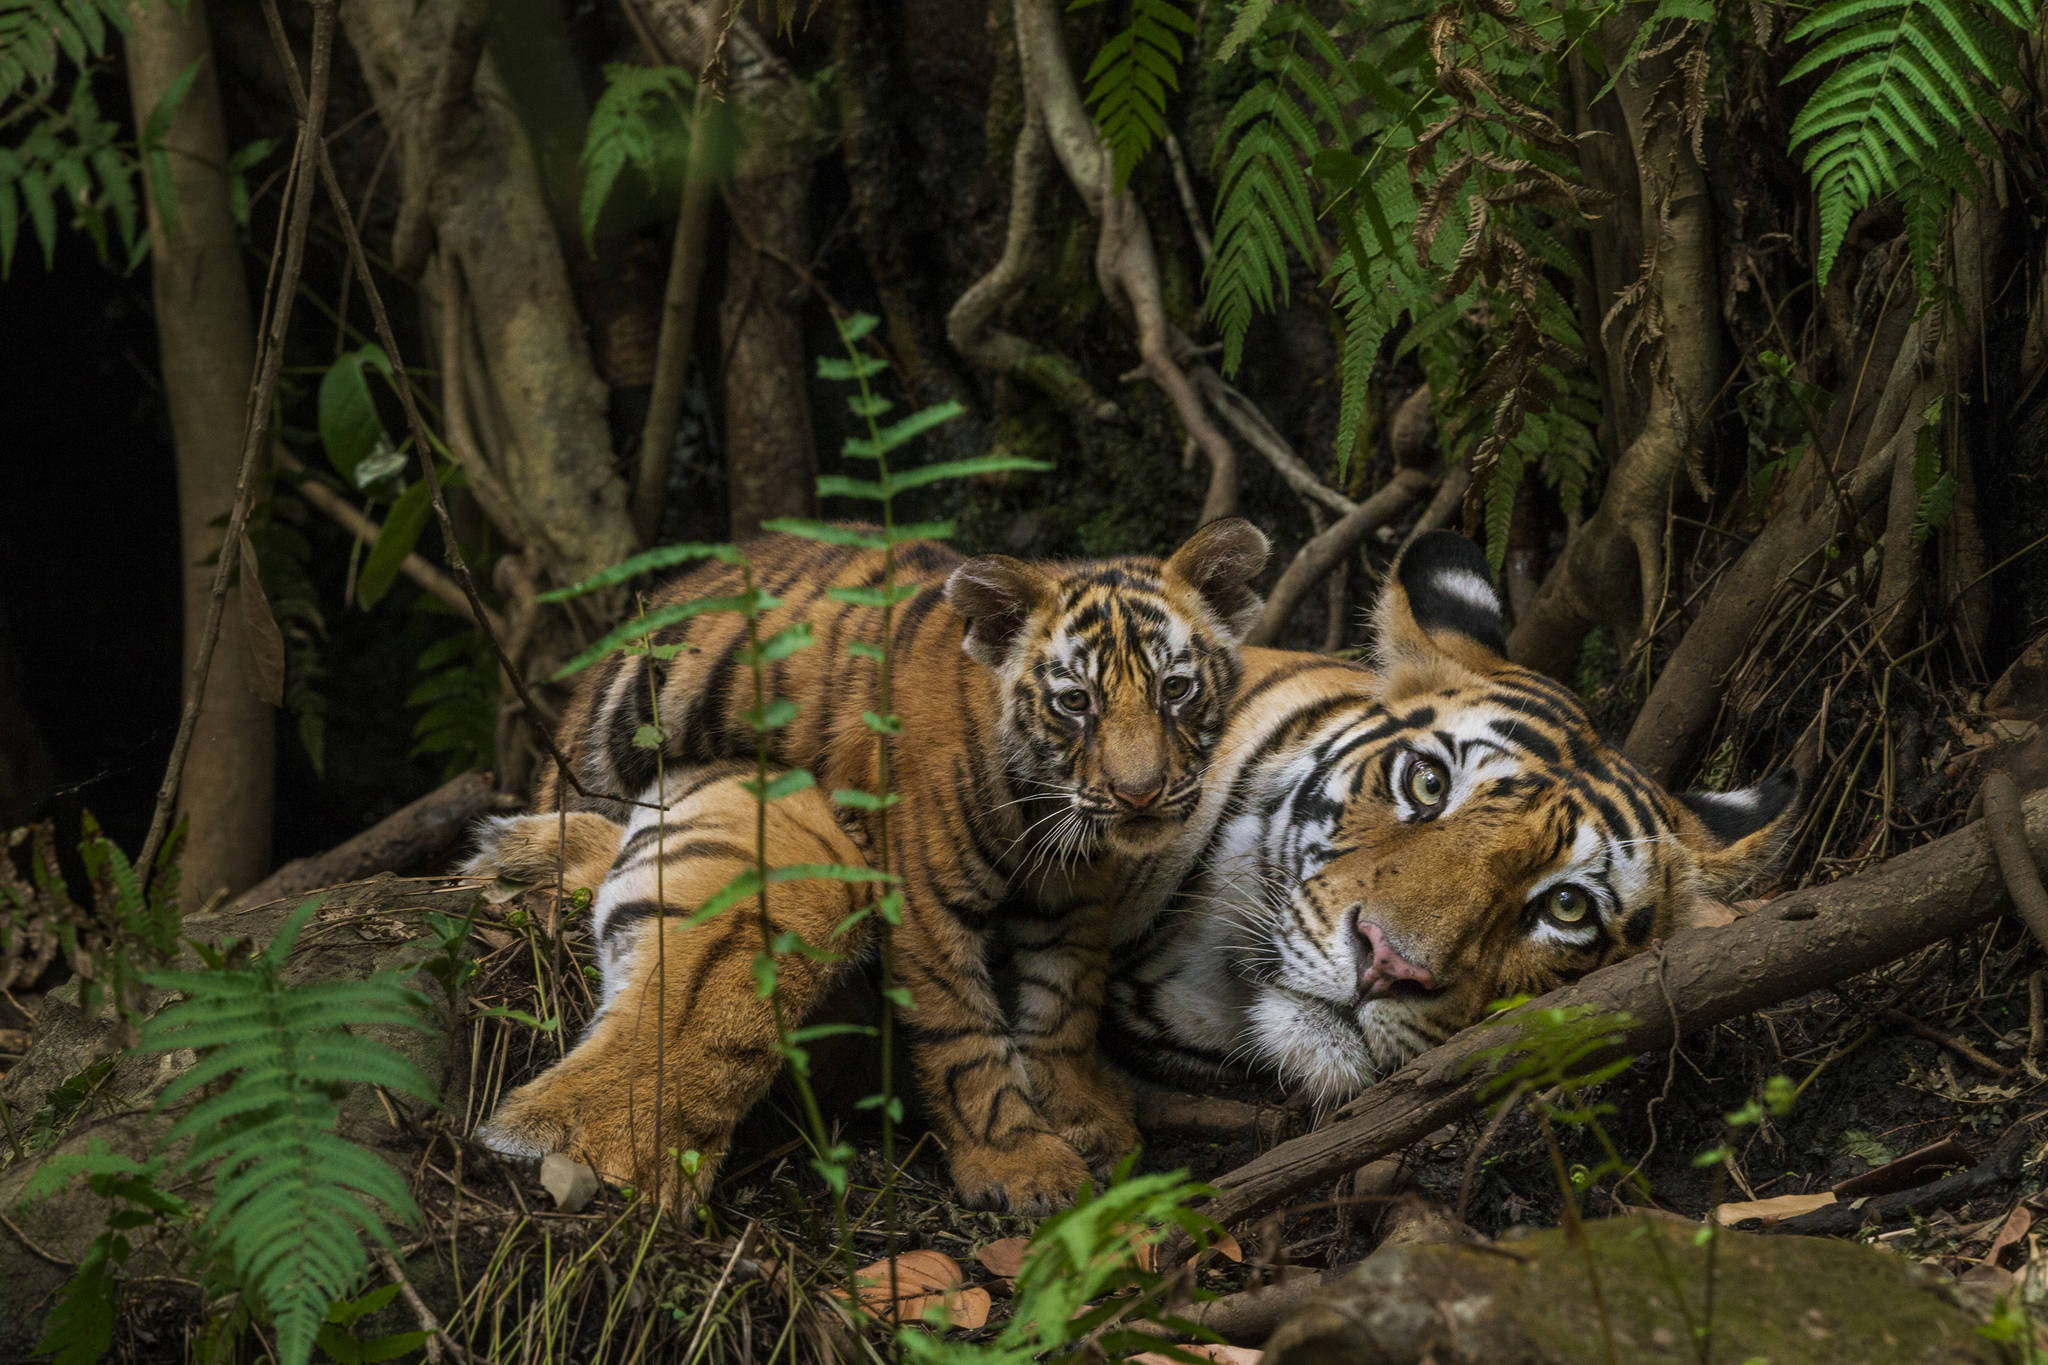 19030922_web1_Tiger-mother-and-cub.-photo-by-Steve-Winter